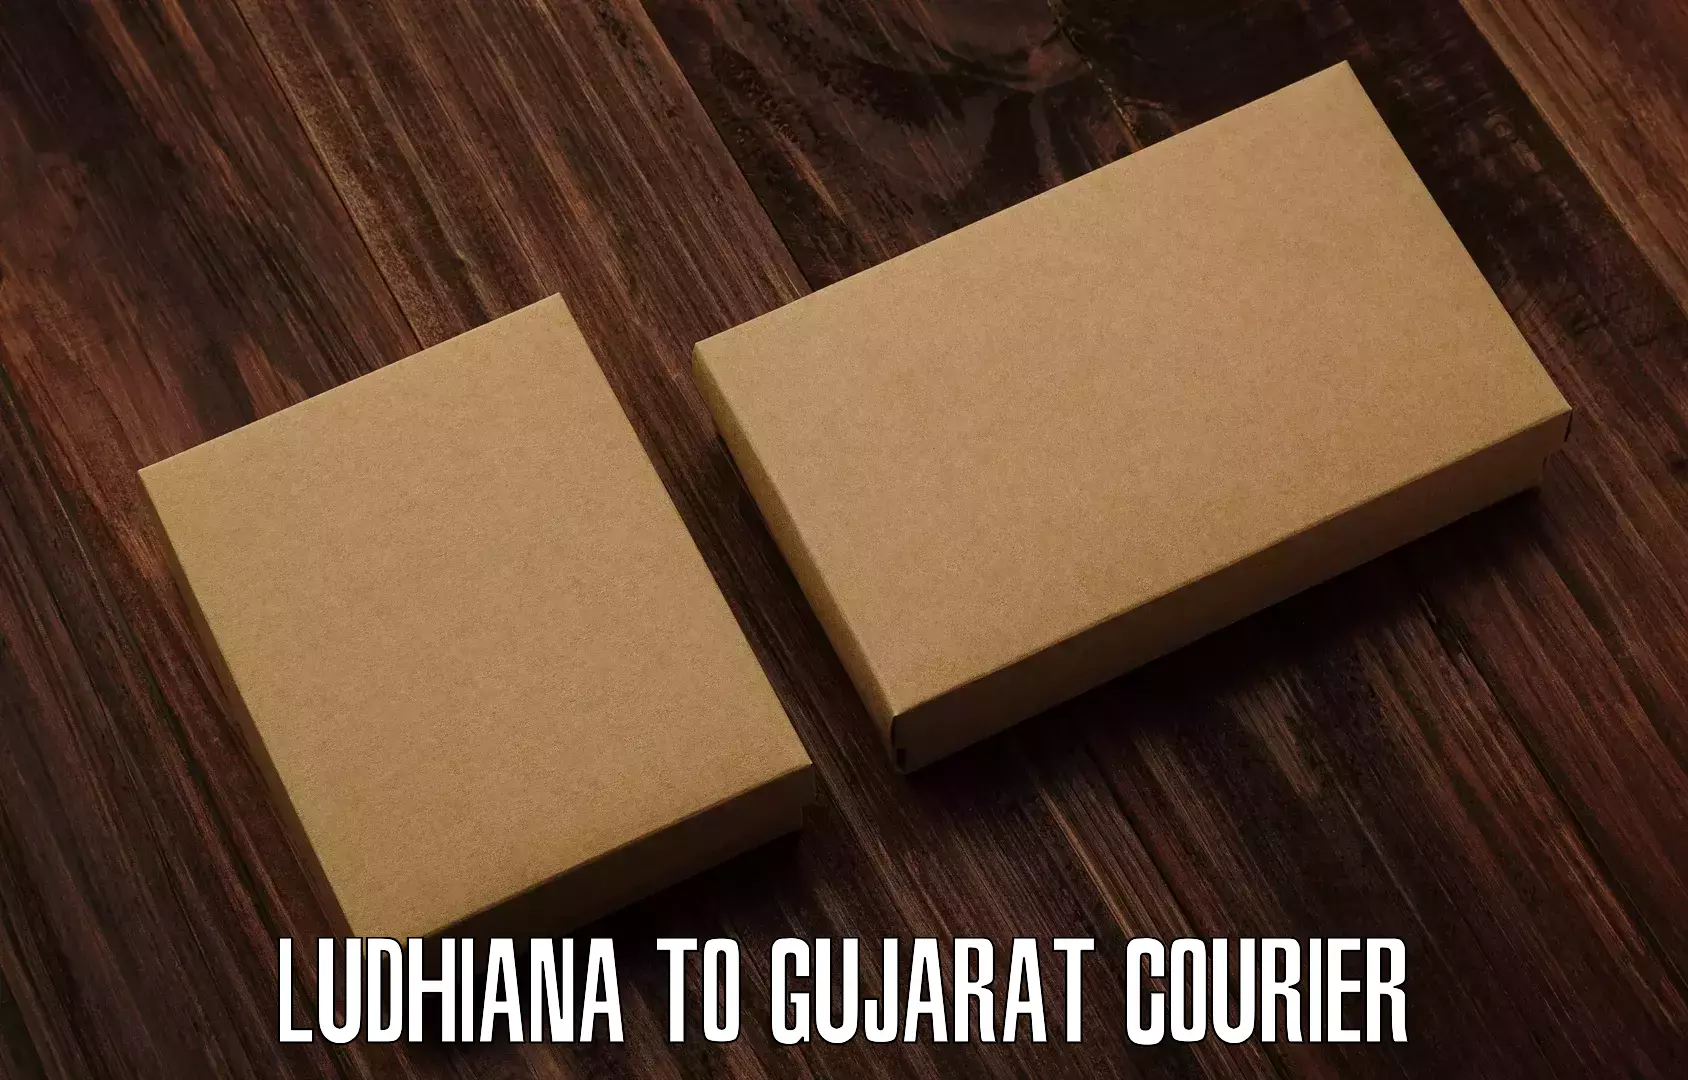 Reliable delivery network Ludhiana to Gujarat